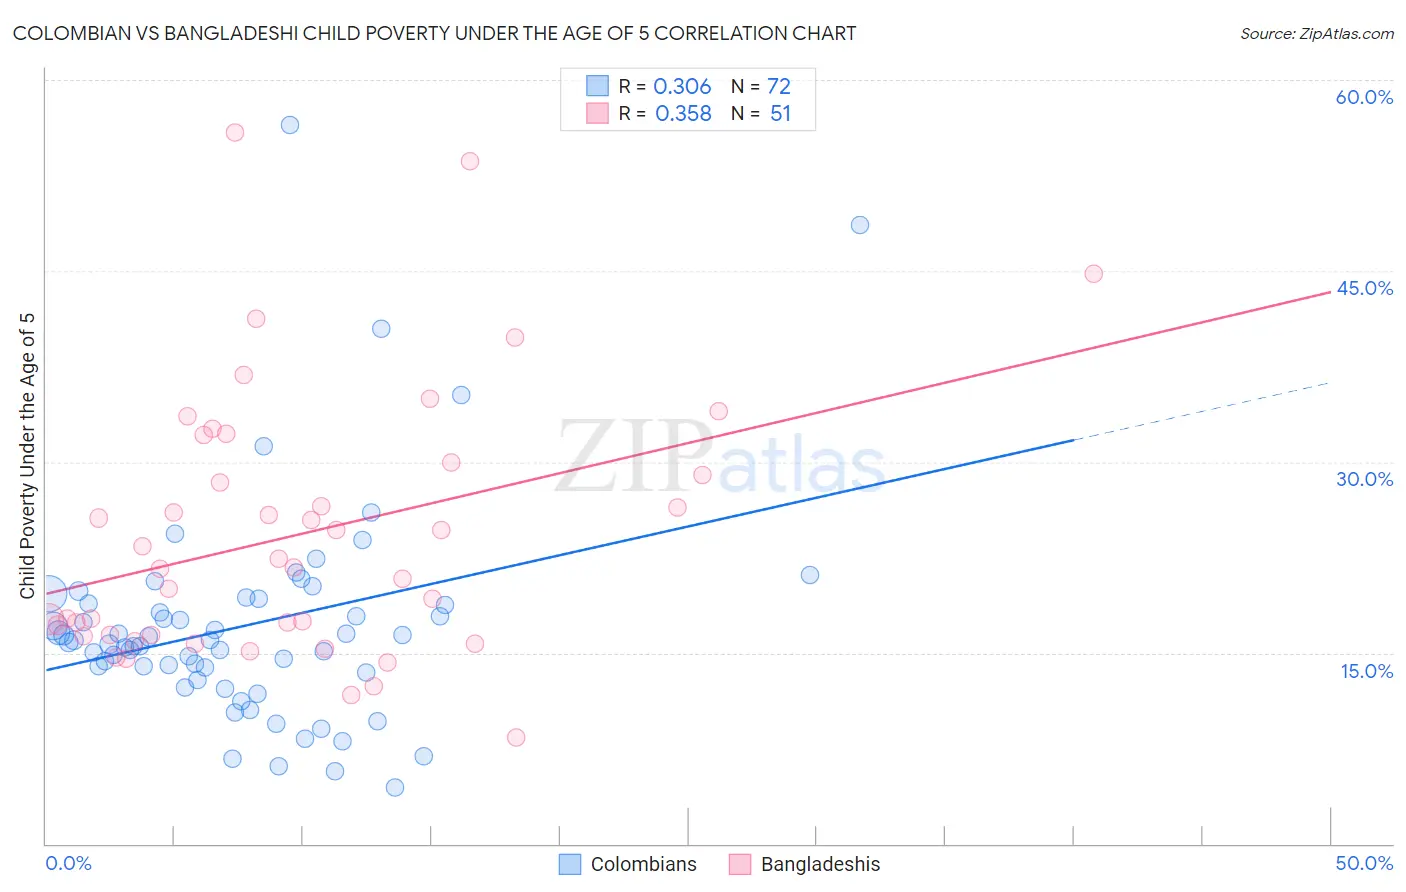 Colombian vs Bangladeshi Child Poverty Under the Age of 5